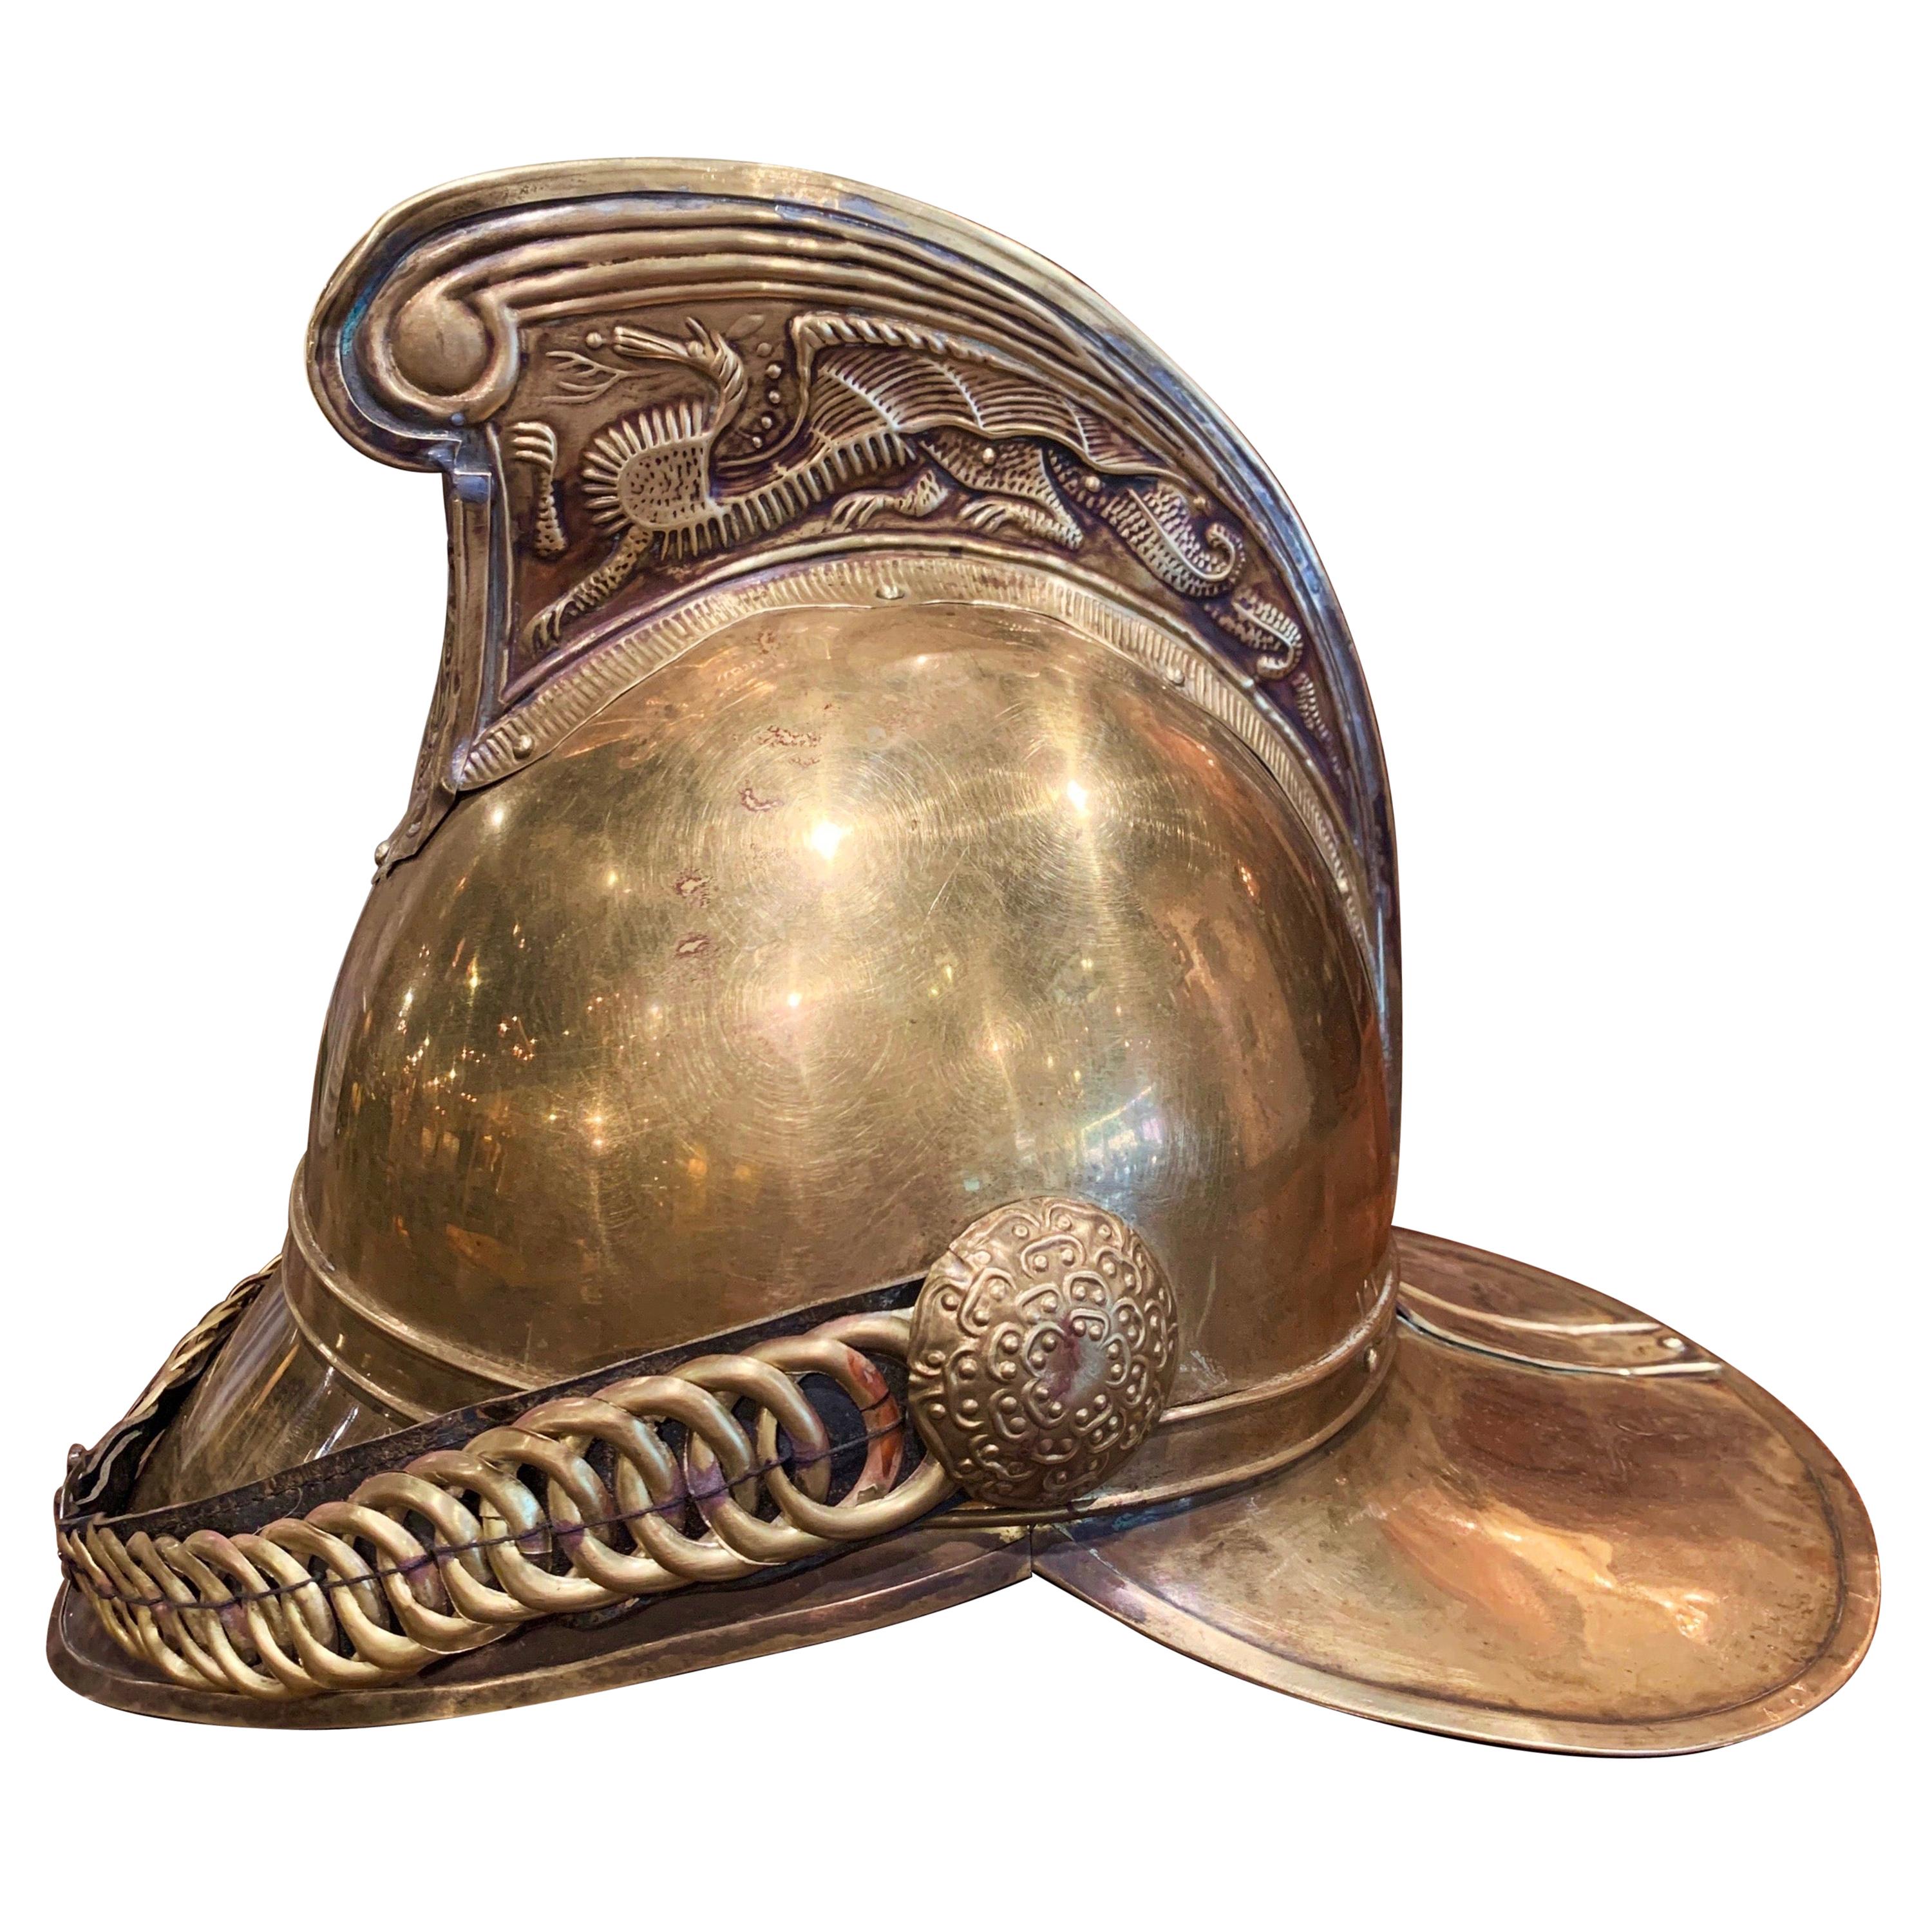 19th Century French Patinated Brass Fireman Helmet with Leather Straps